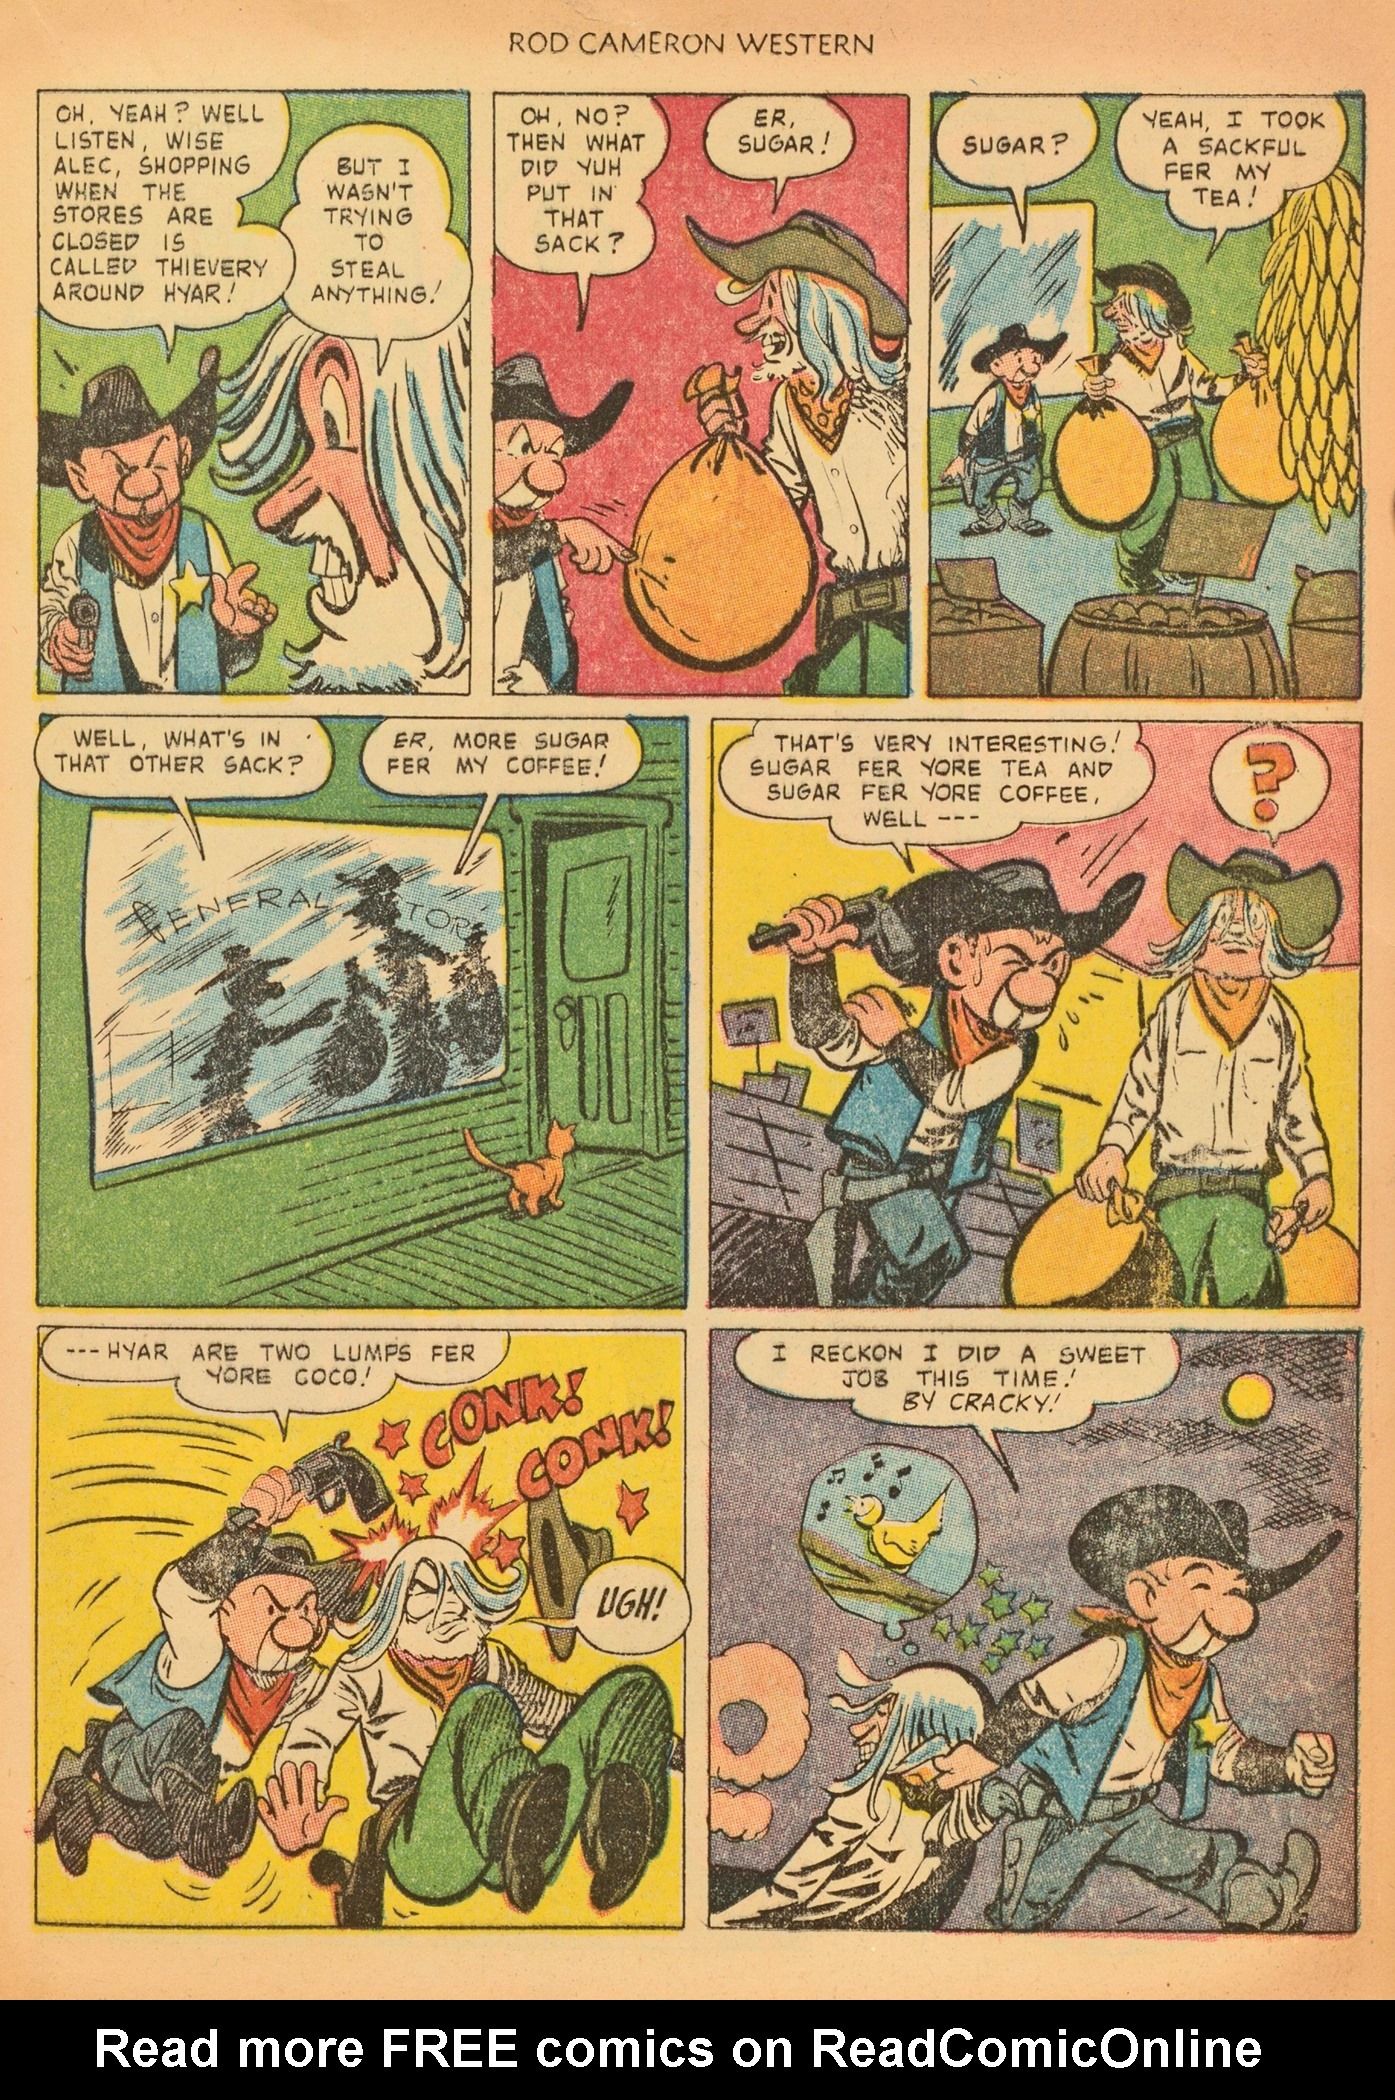 Read online Rod Cameron Western comic -  Issue #19 - 17